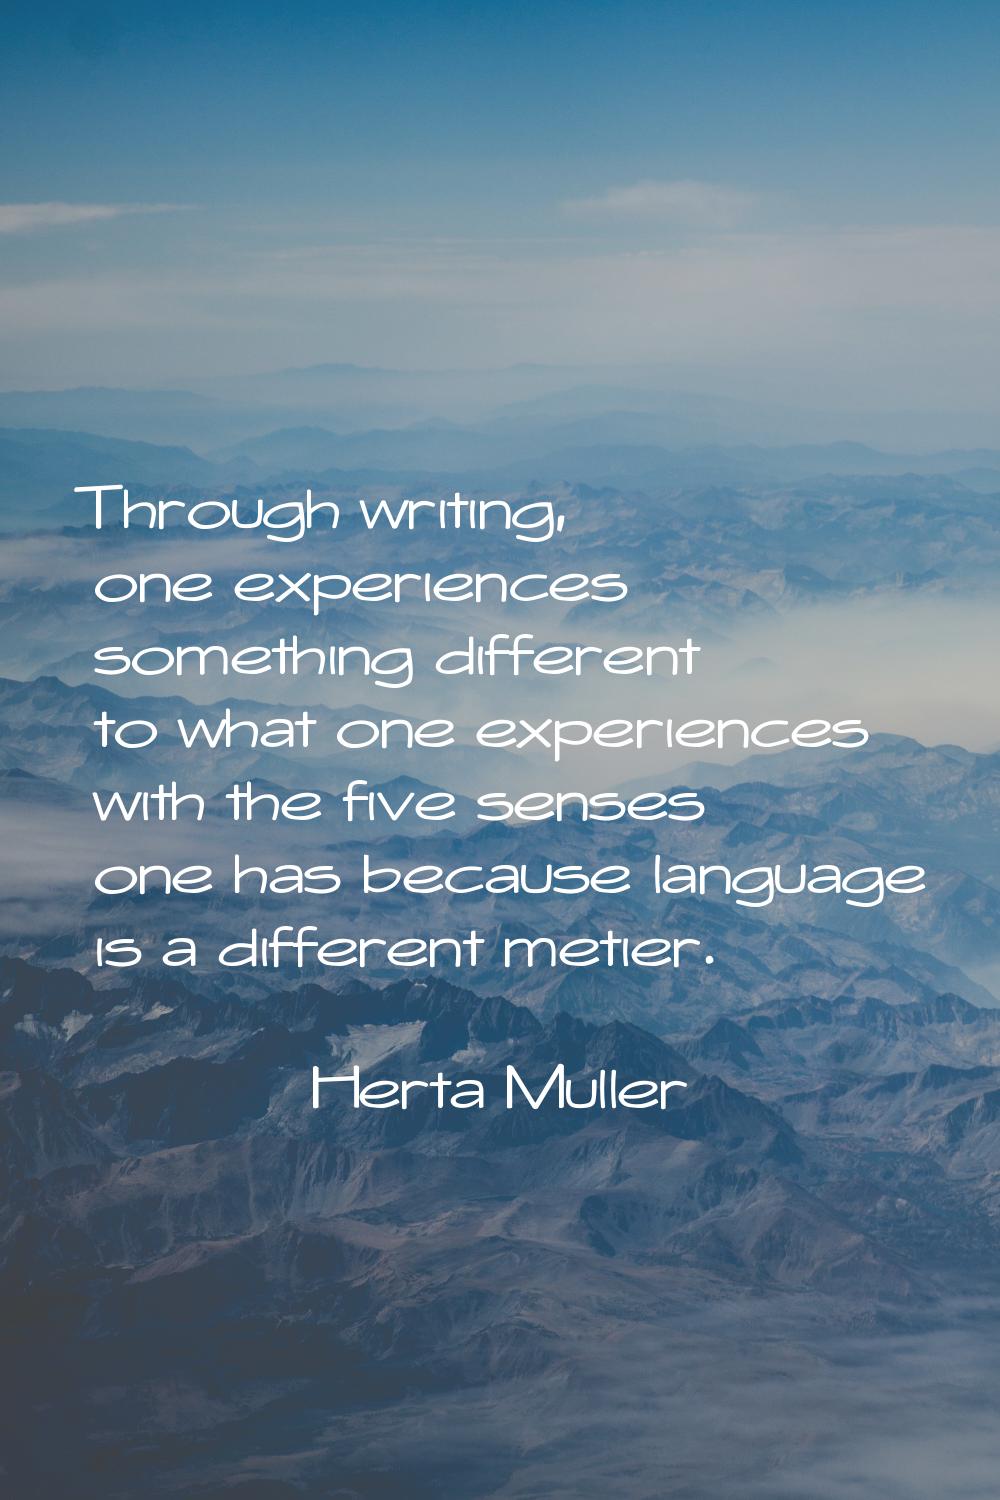 Through writing, one experiences something different to what one experiences with the five senses o